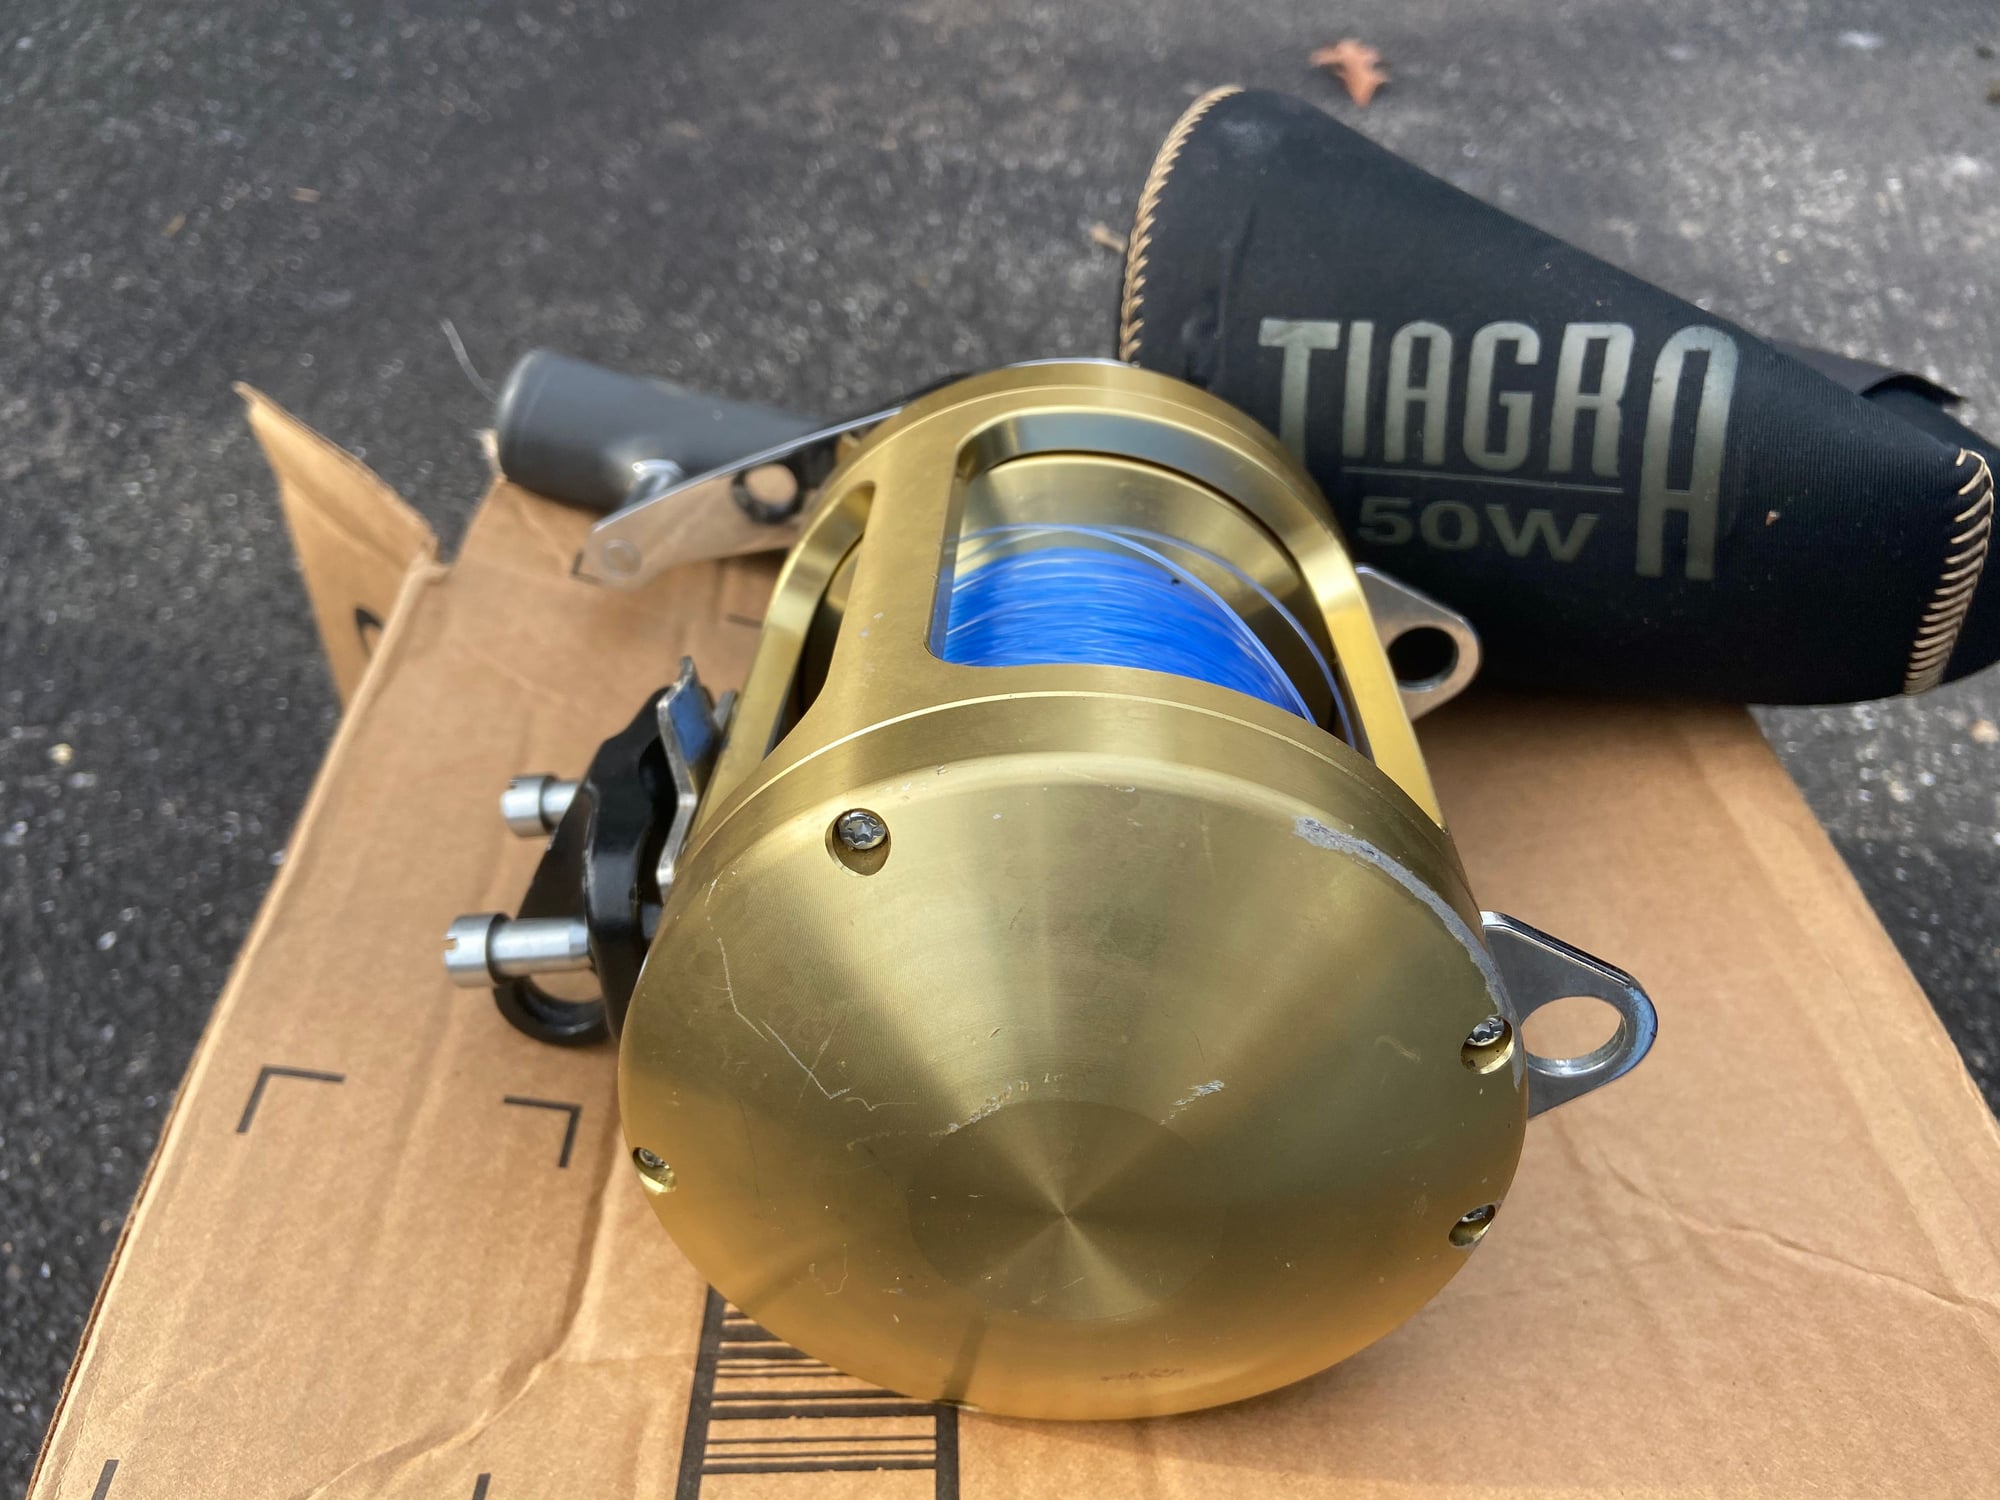 Shimano Tiagra 50W LRS- sell or trade - The Hull Truth - Boating and  Fishing Forum